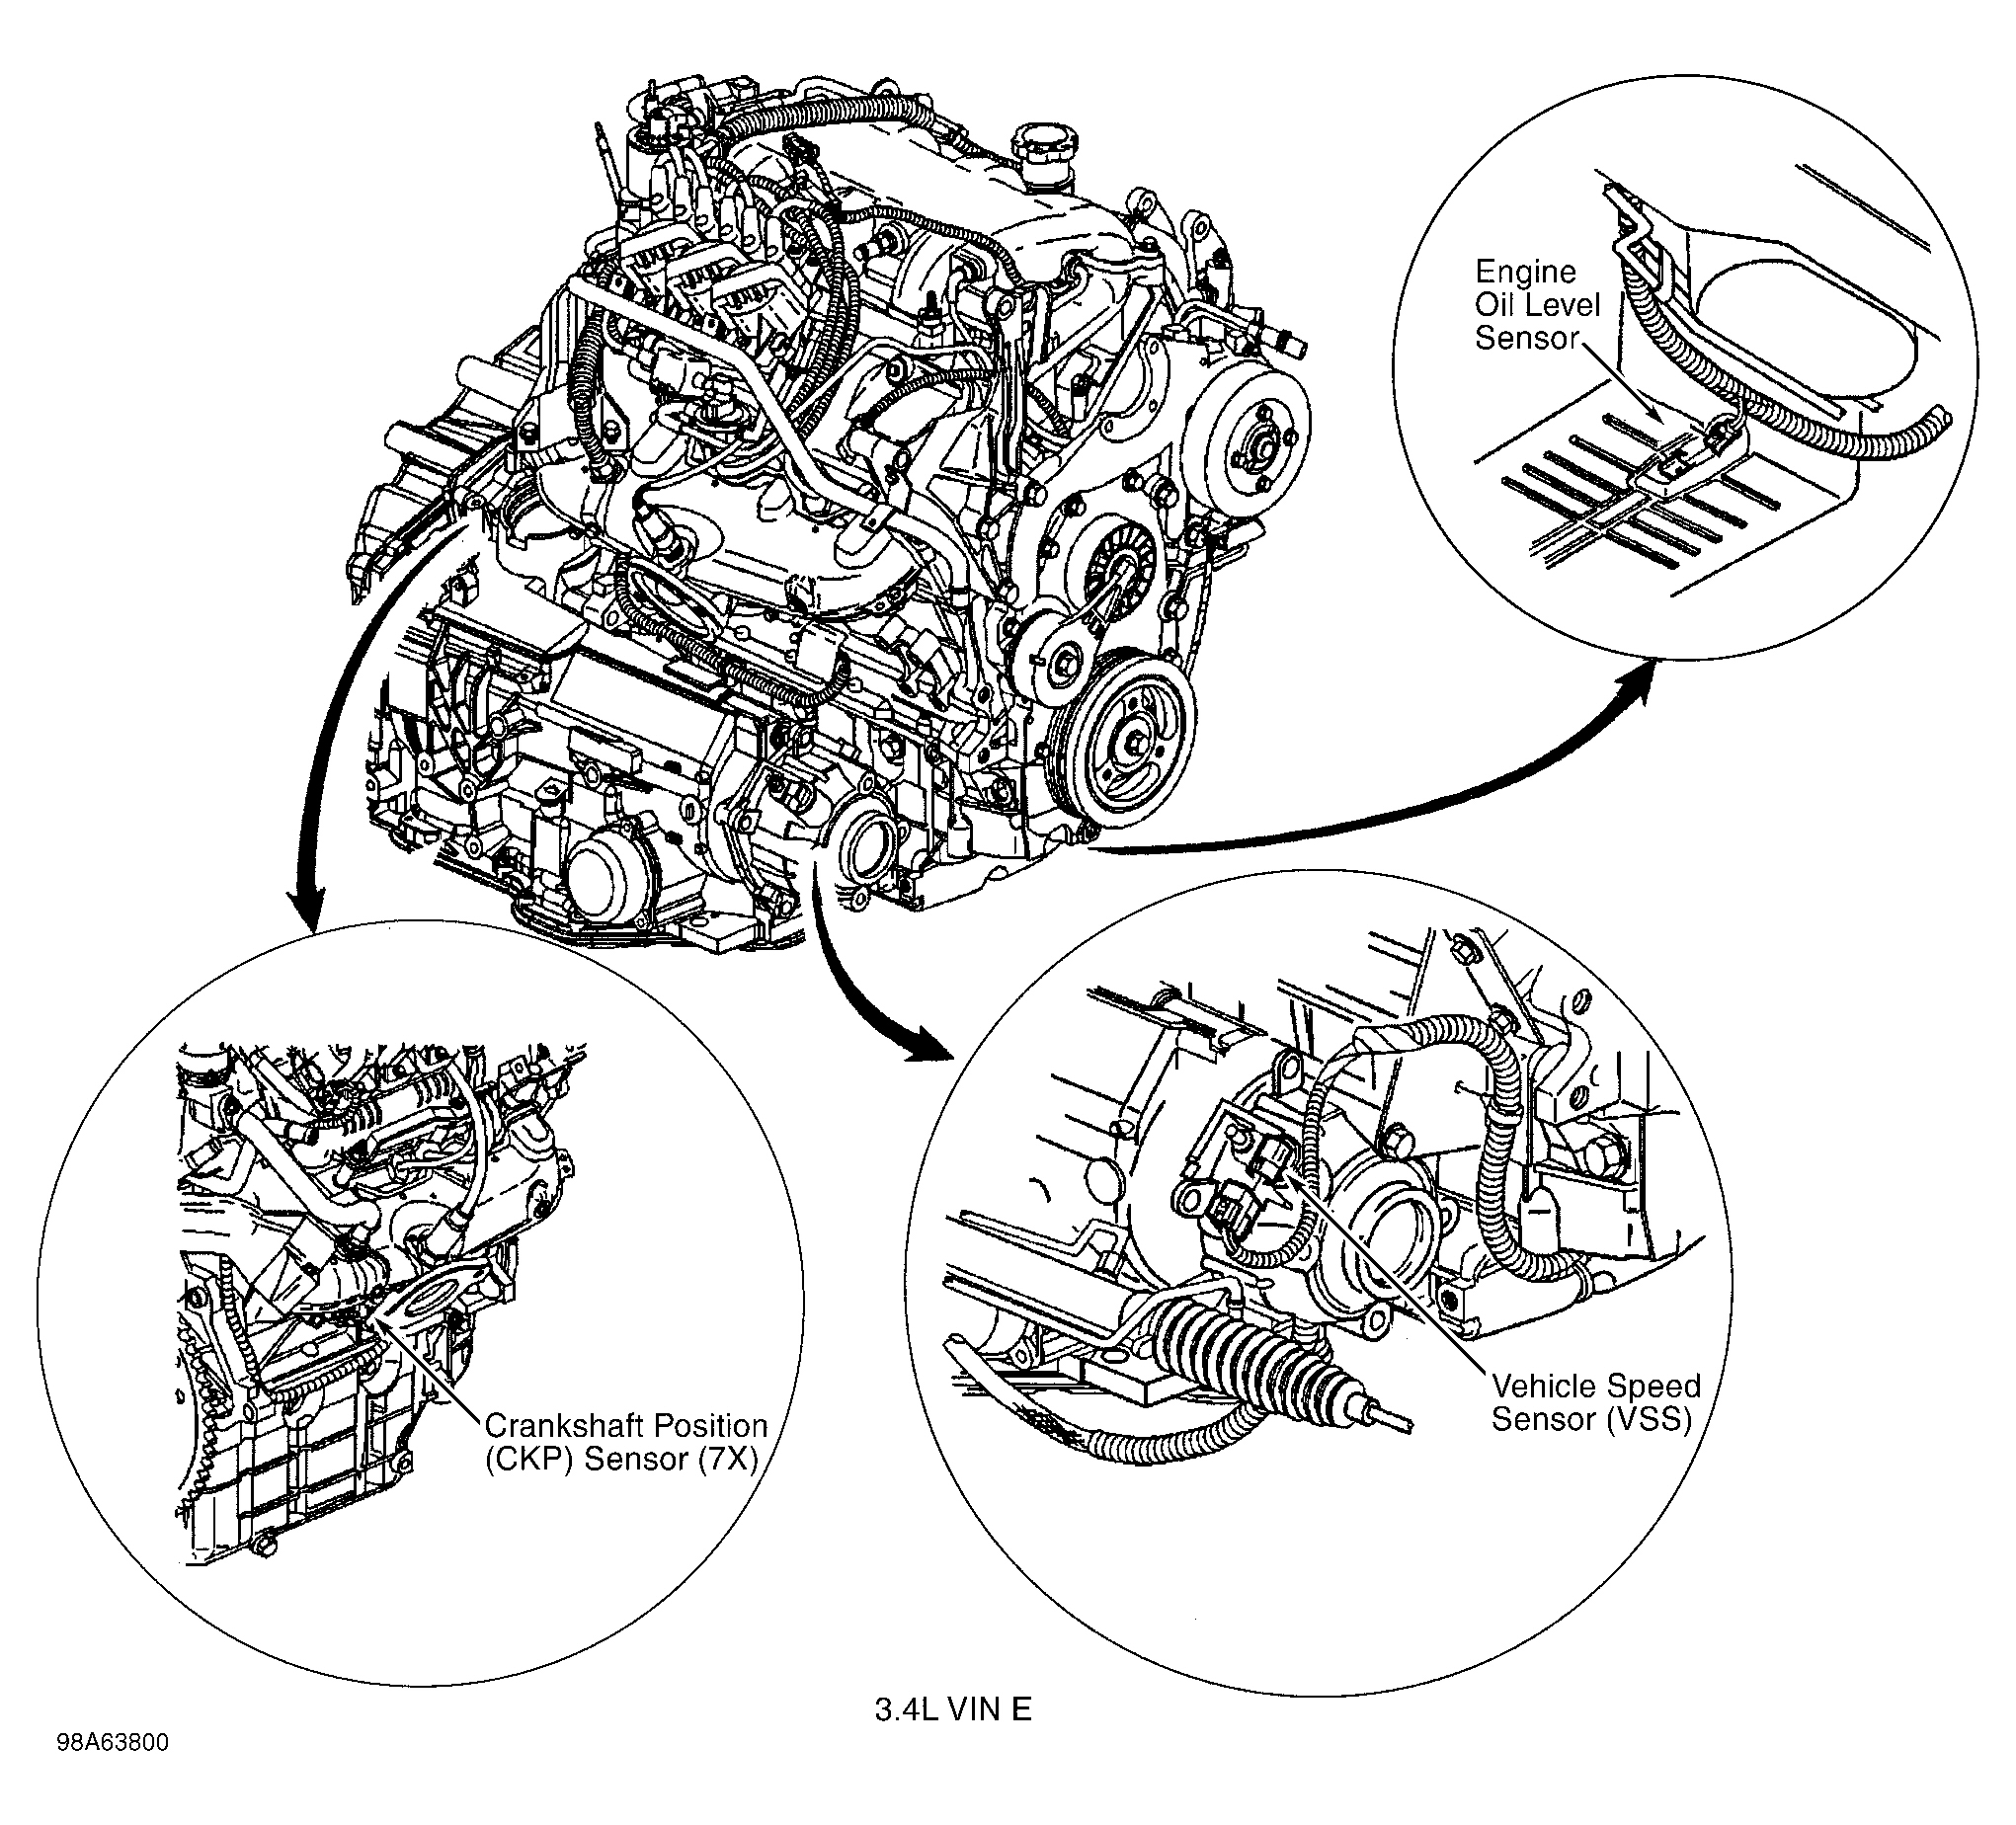 Chevrolet Impala LS 2000 - Component Locations -  Right Side Of Engine (3.4L VIN E)